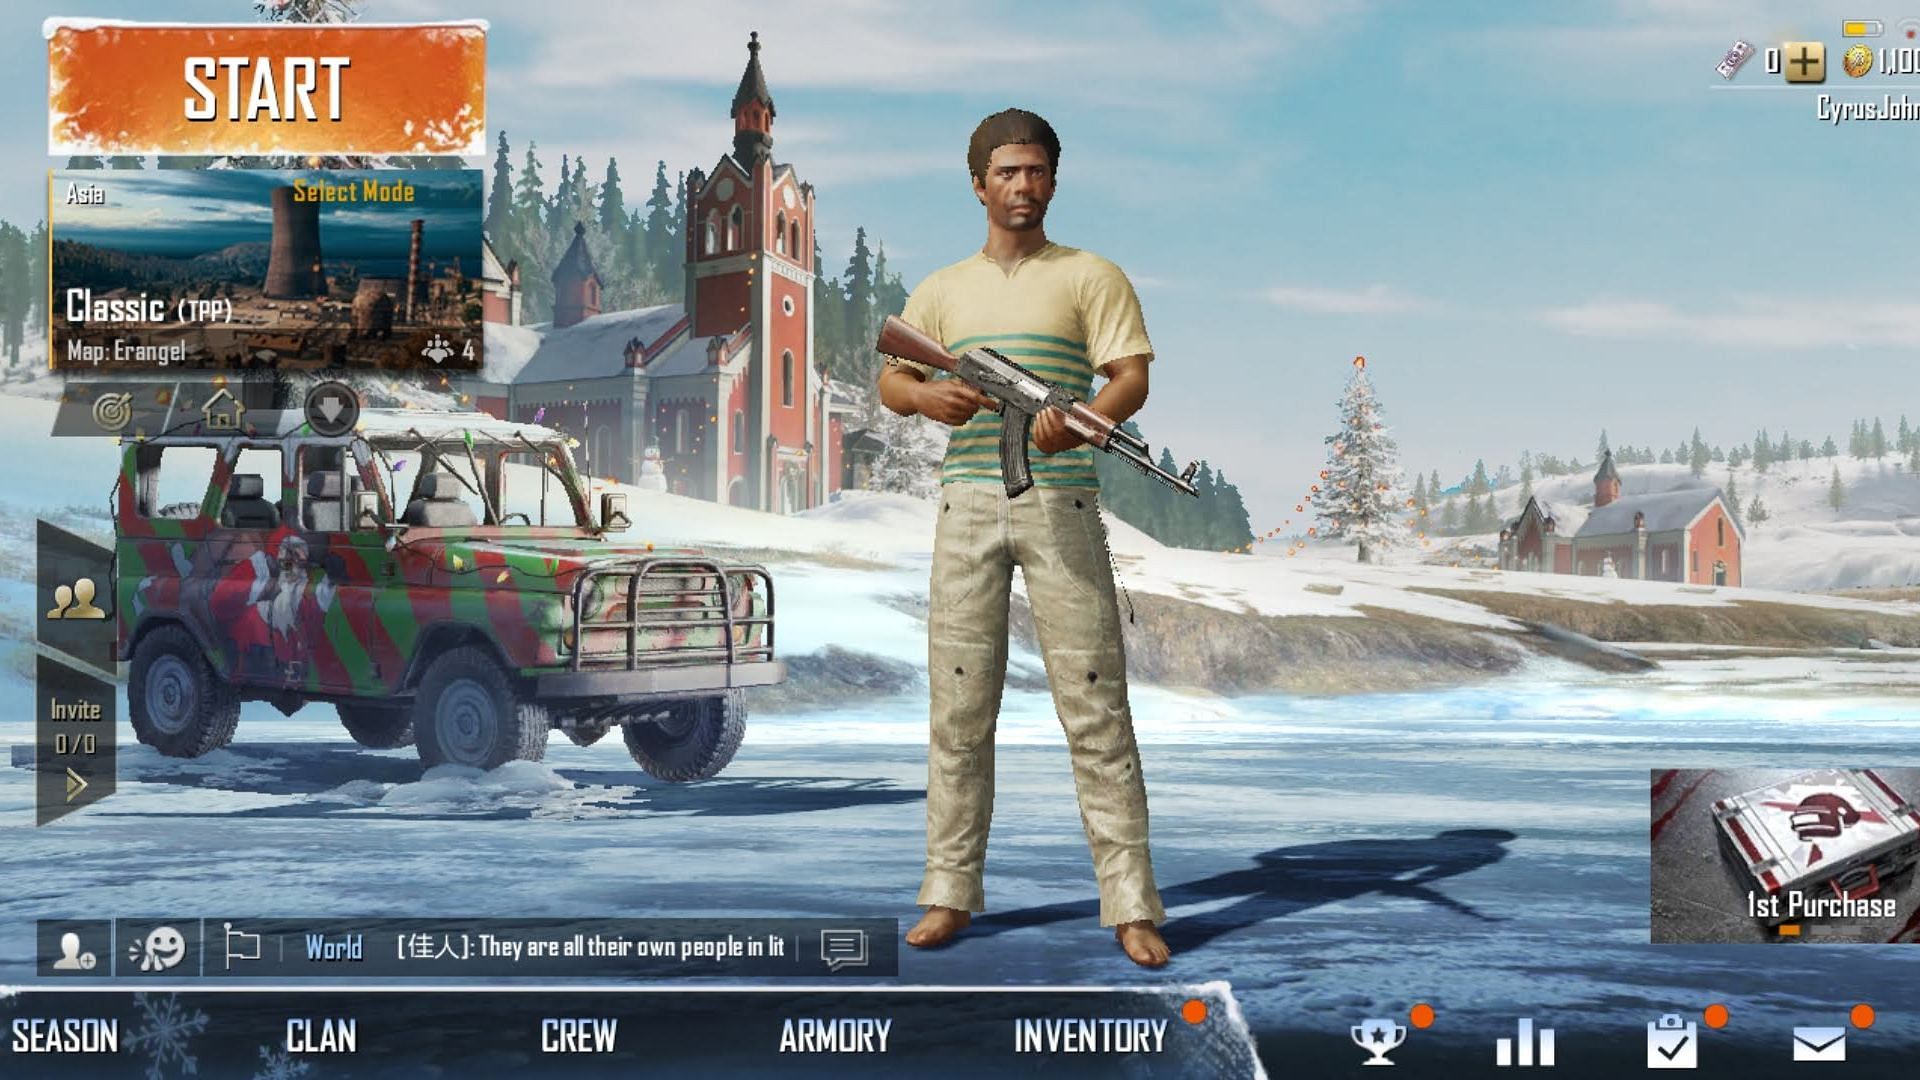 Pubg Mobile Game Time Limit In India For Players Under 18 Years The Company Has Rolled Out A Gamplay Management System To Remind Players To Take Breaks